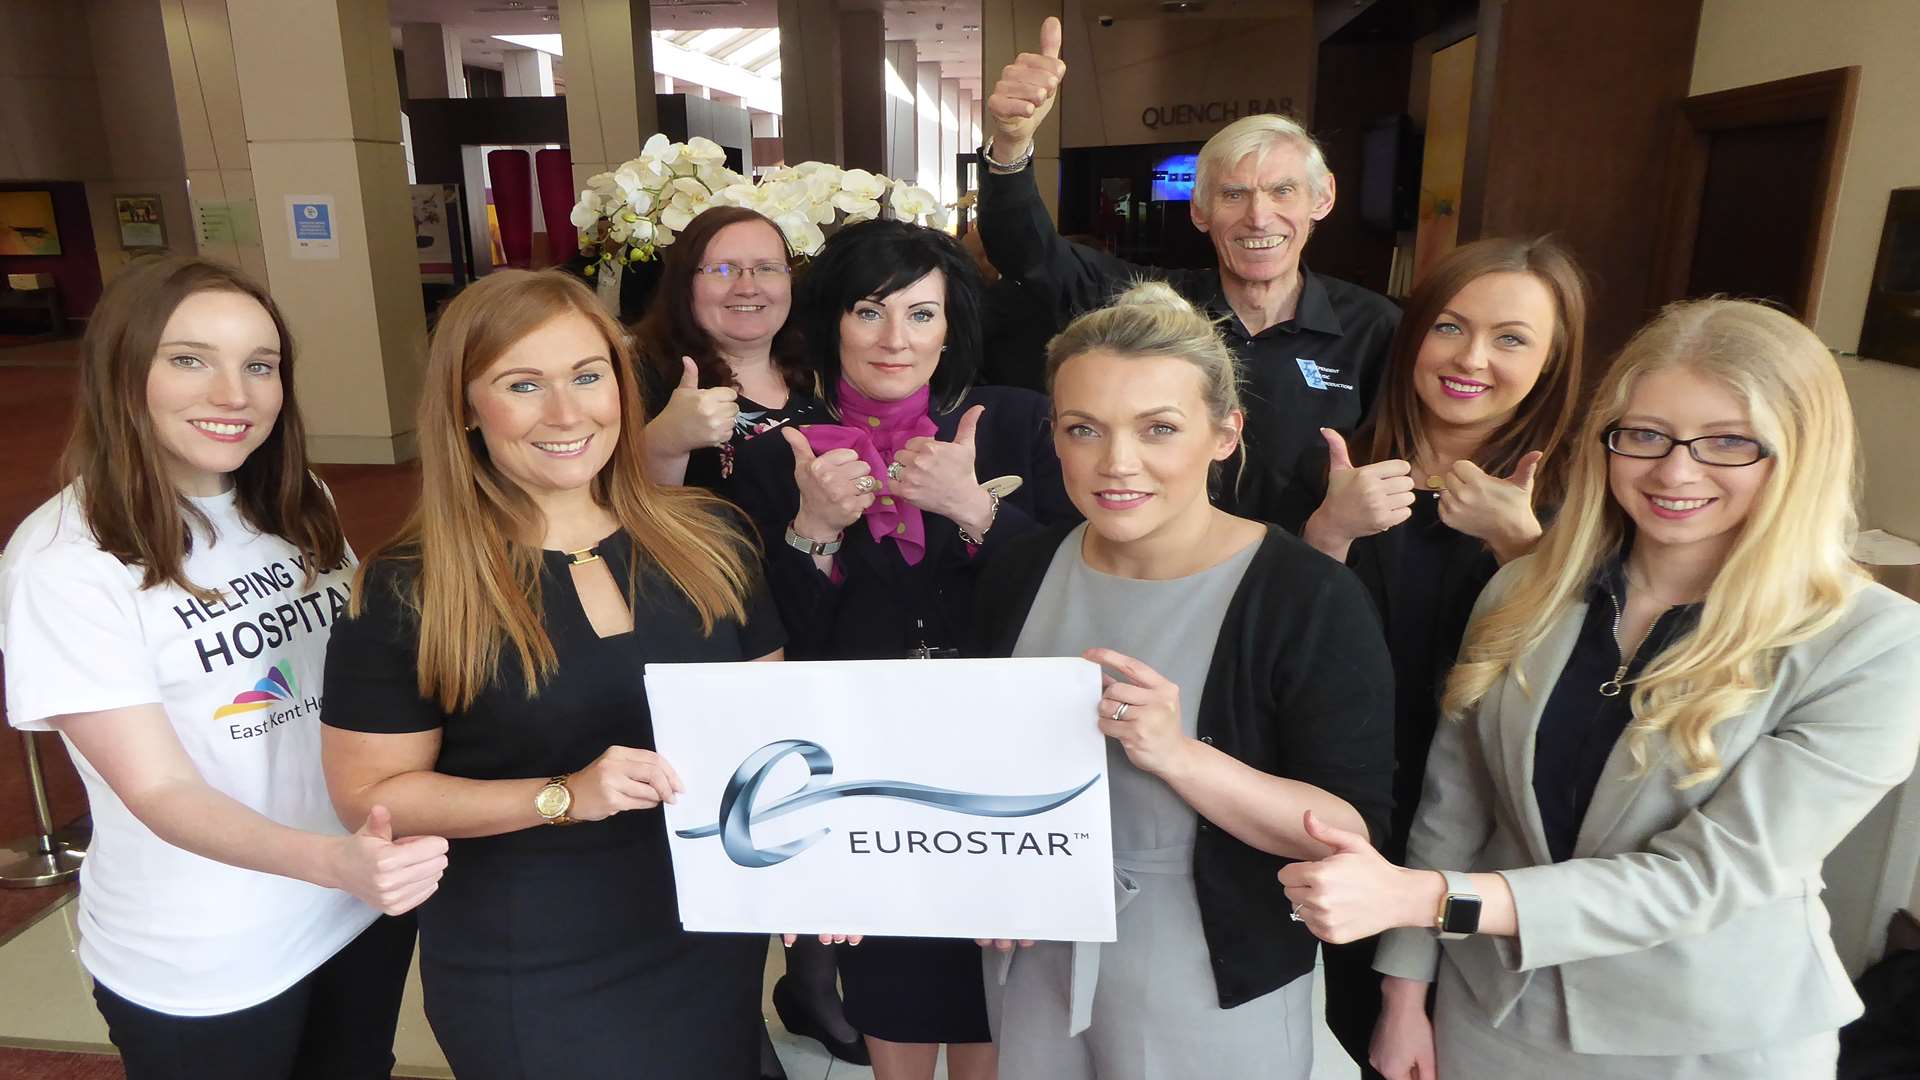 Lindsay Bonner of Office Angels and Naomi Hayden of Hallett & Co join event partners to unveil the Eurostar voucher that will be won at the KM Big Charity Quiz.